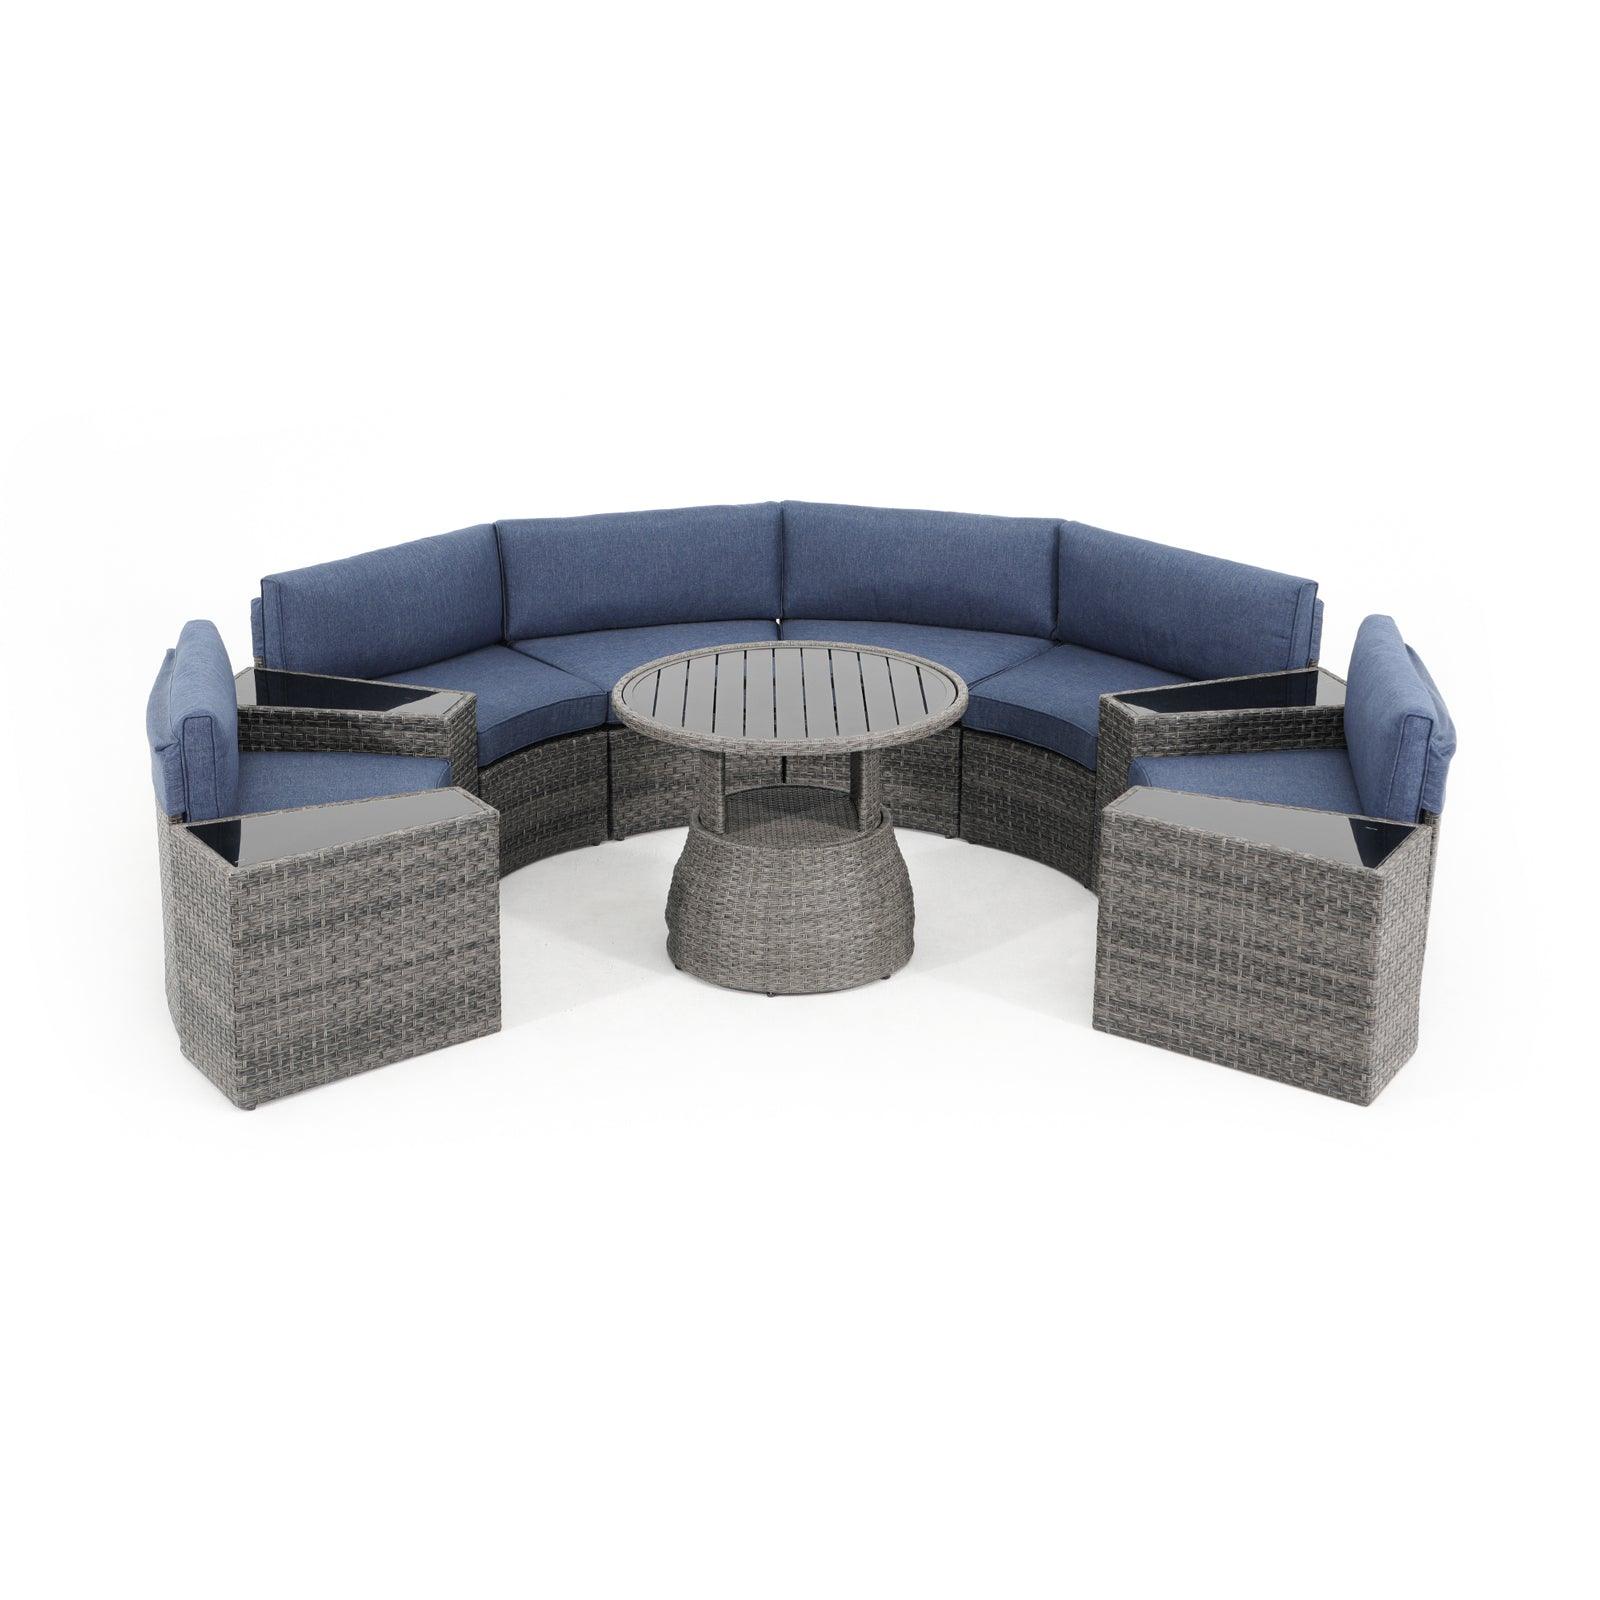 Boboli 6-seater Grey Outdoor Wicker Curved Sectional sofas with navy blue cushions + 4 wicker side tables + 1 Lift-top grey wicker round table, front view - Jardina Furniture#color_Navy Blue#piece_11-pc.